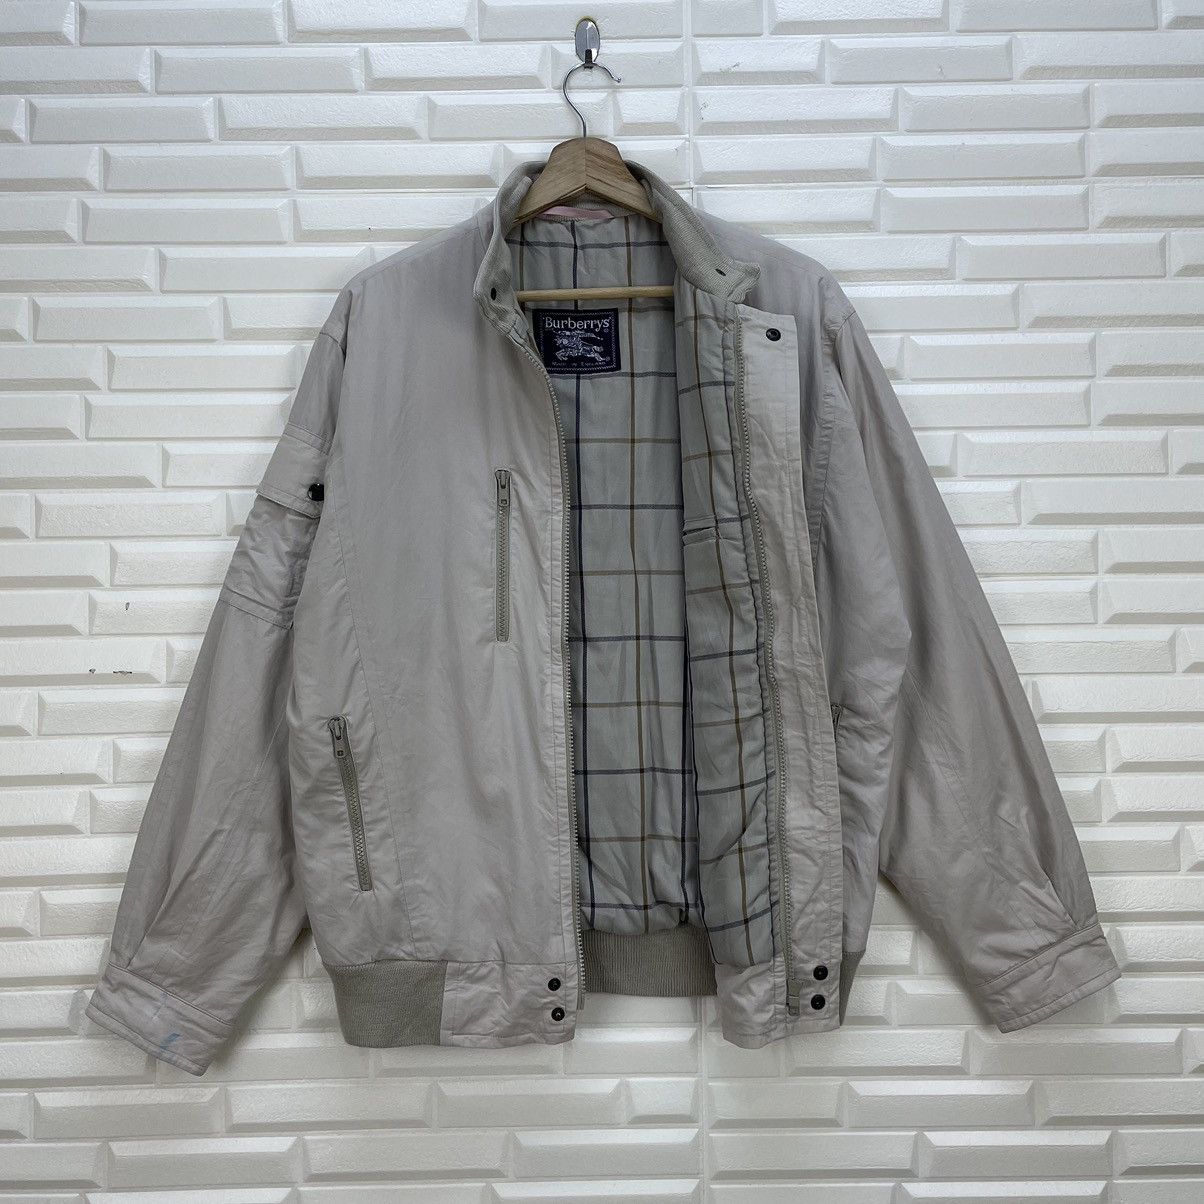 Vintage Burberry Made In England Jacket - 5